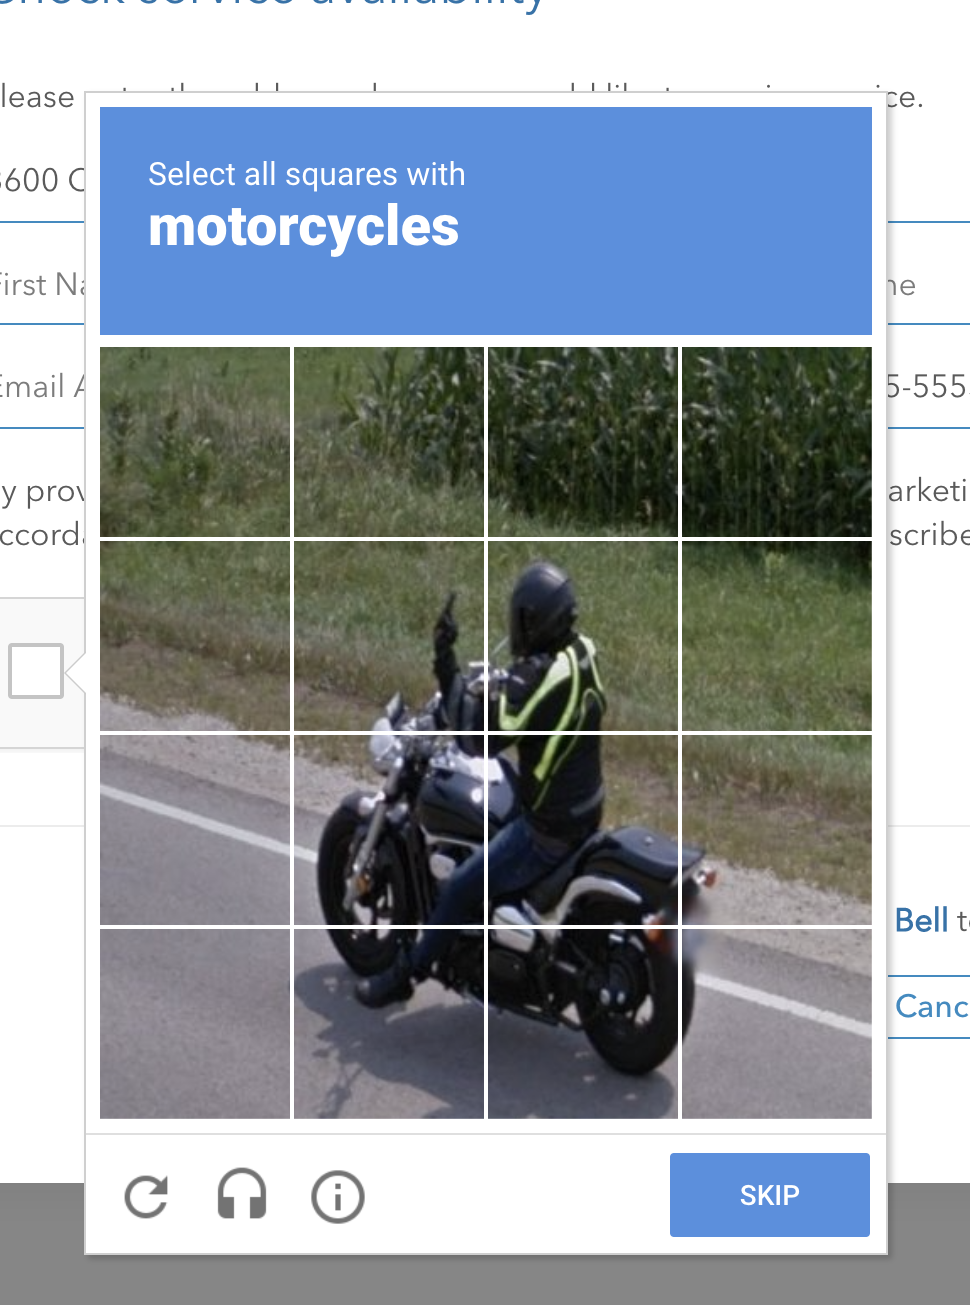 Motorcyclist hates CAPTCHAs as much as we all do